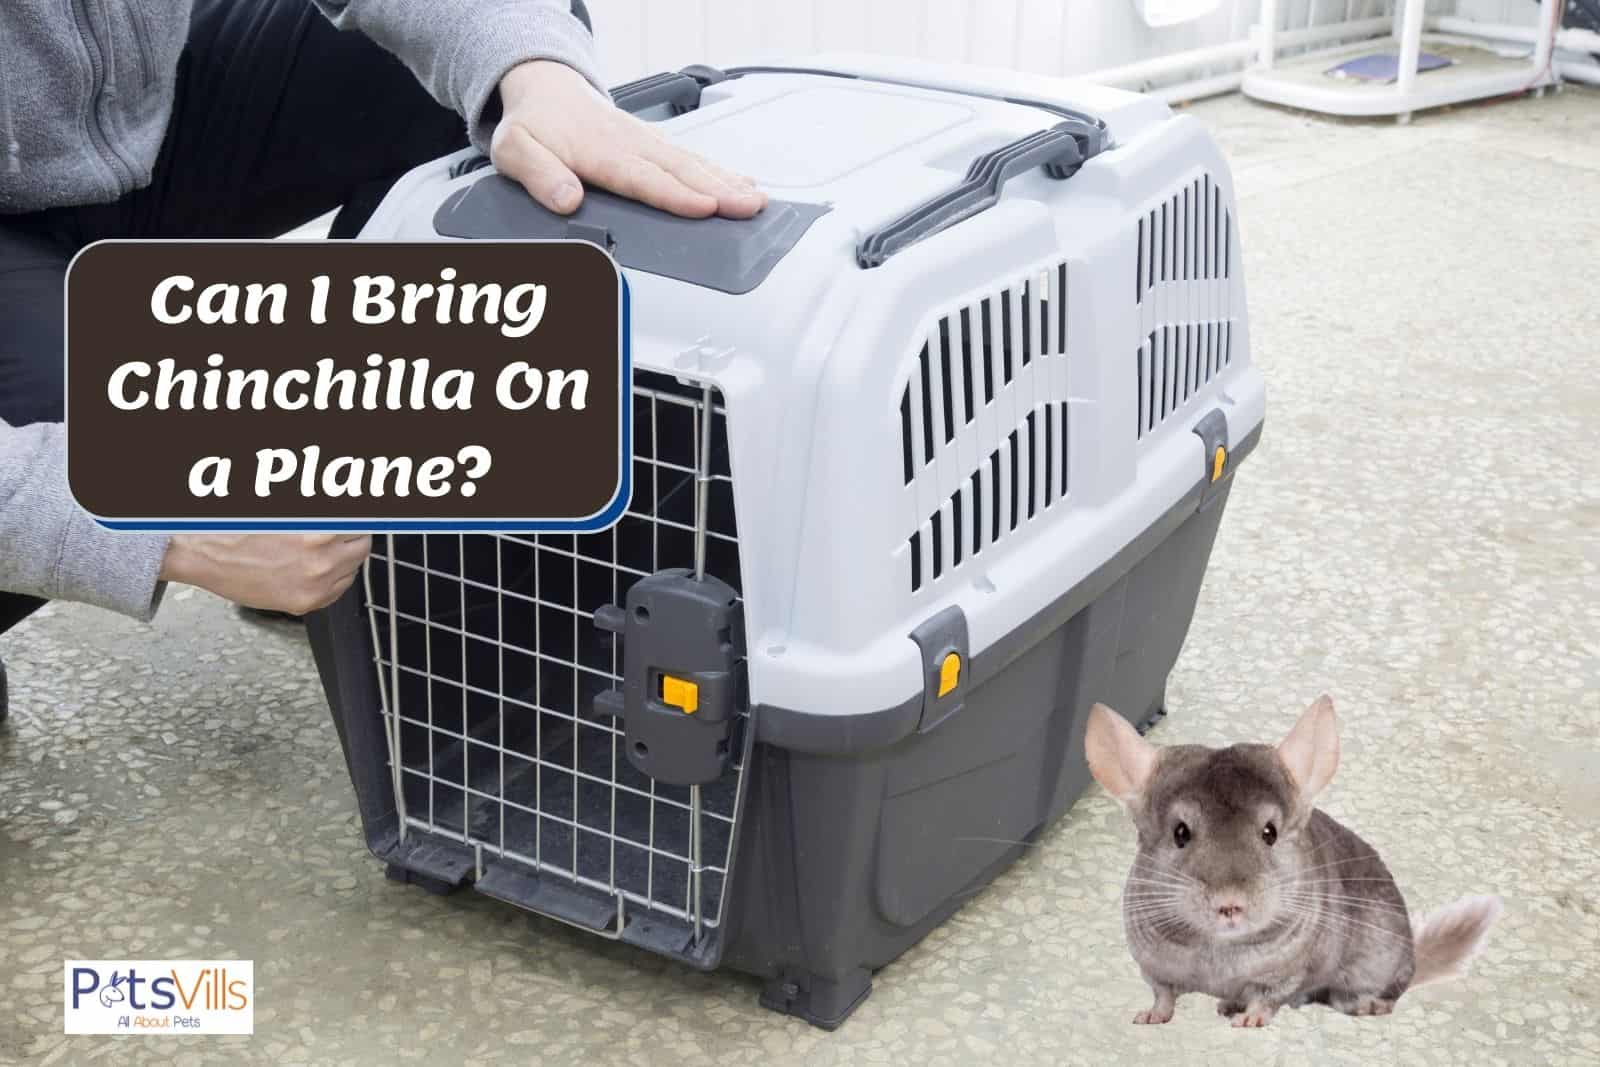 a carrier for a chinchilla: so, Can I Bring a Chinchilla On a Plane?